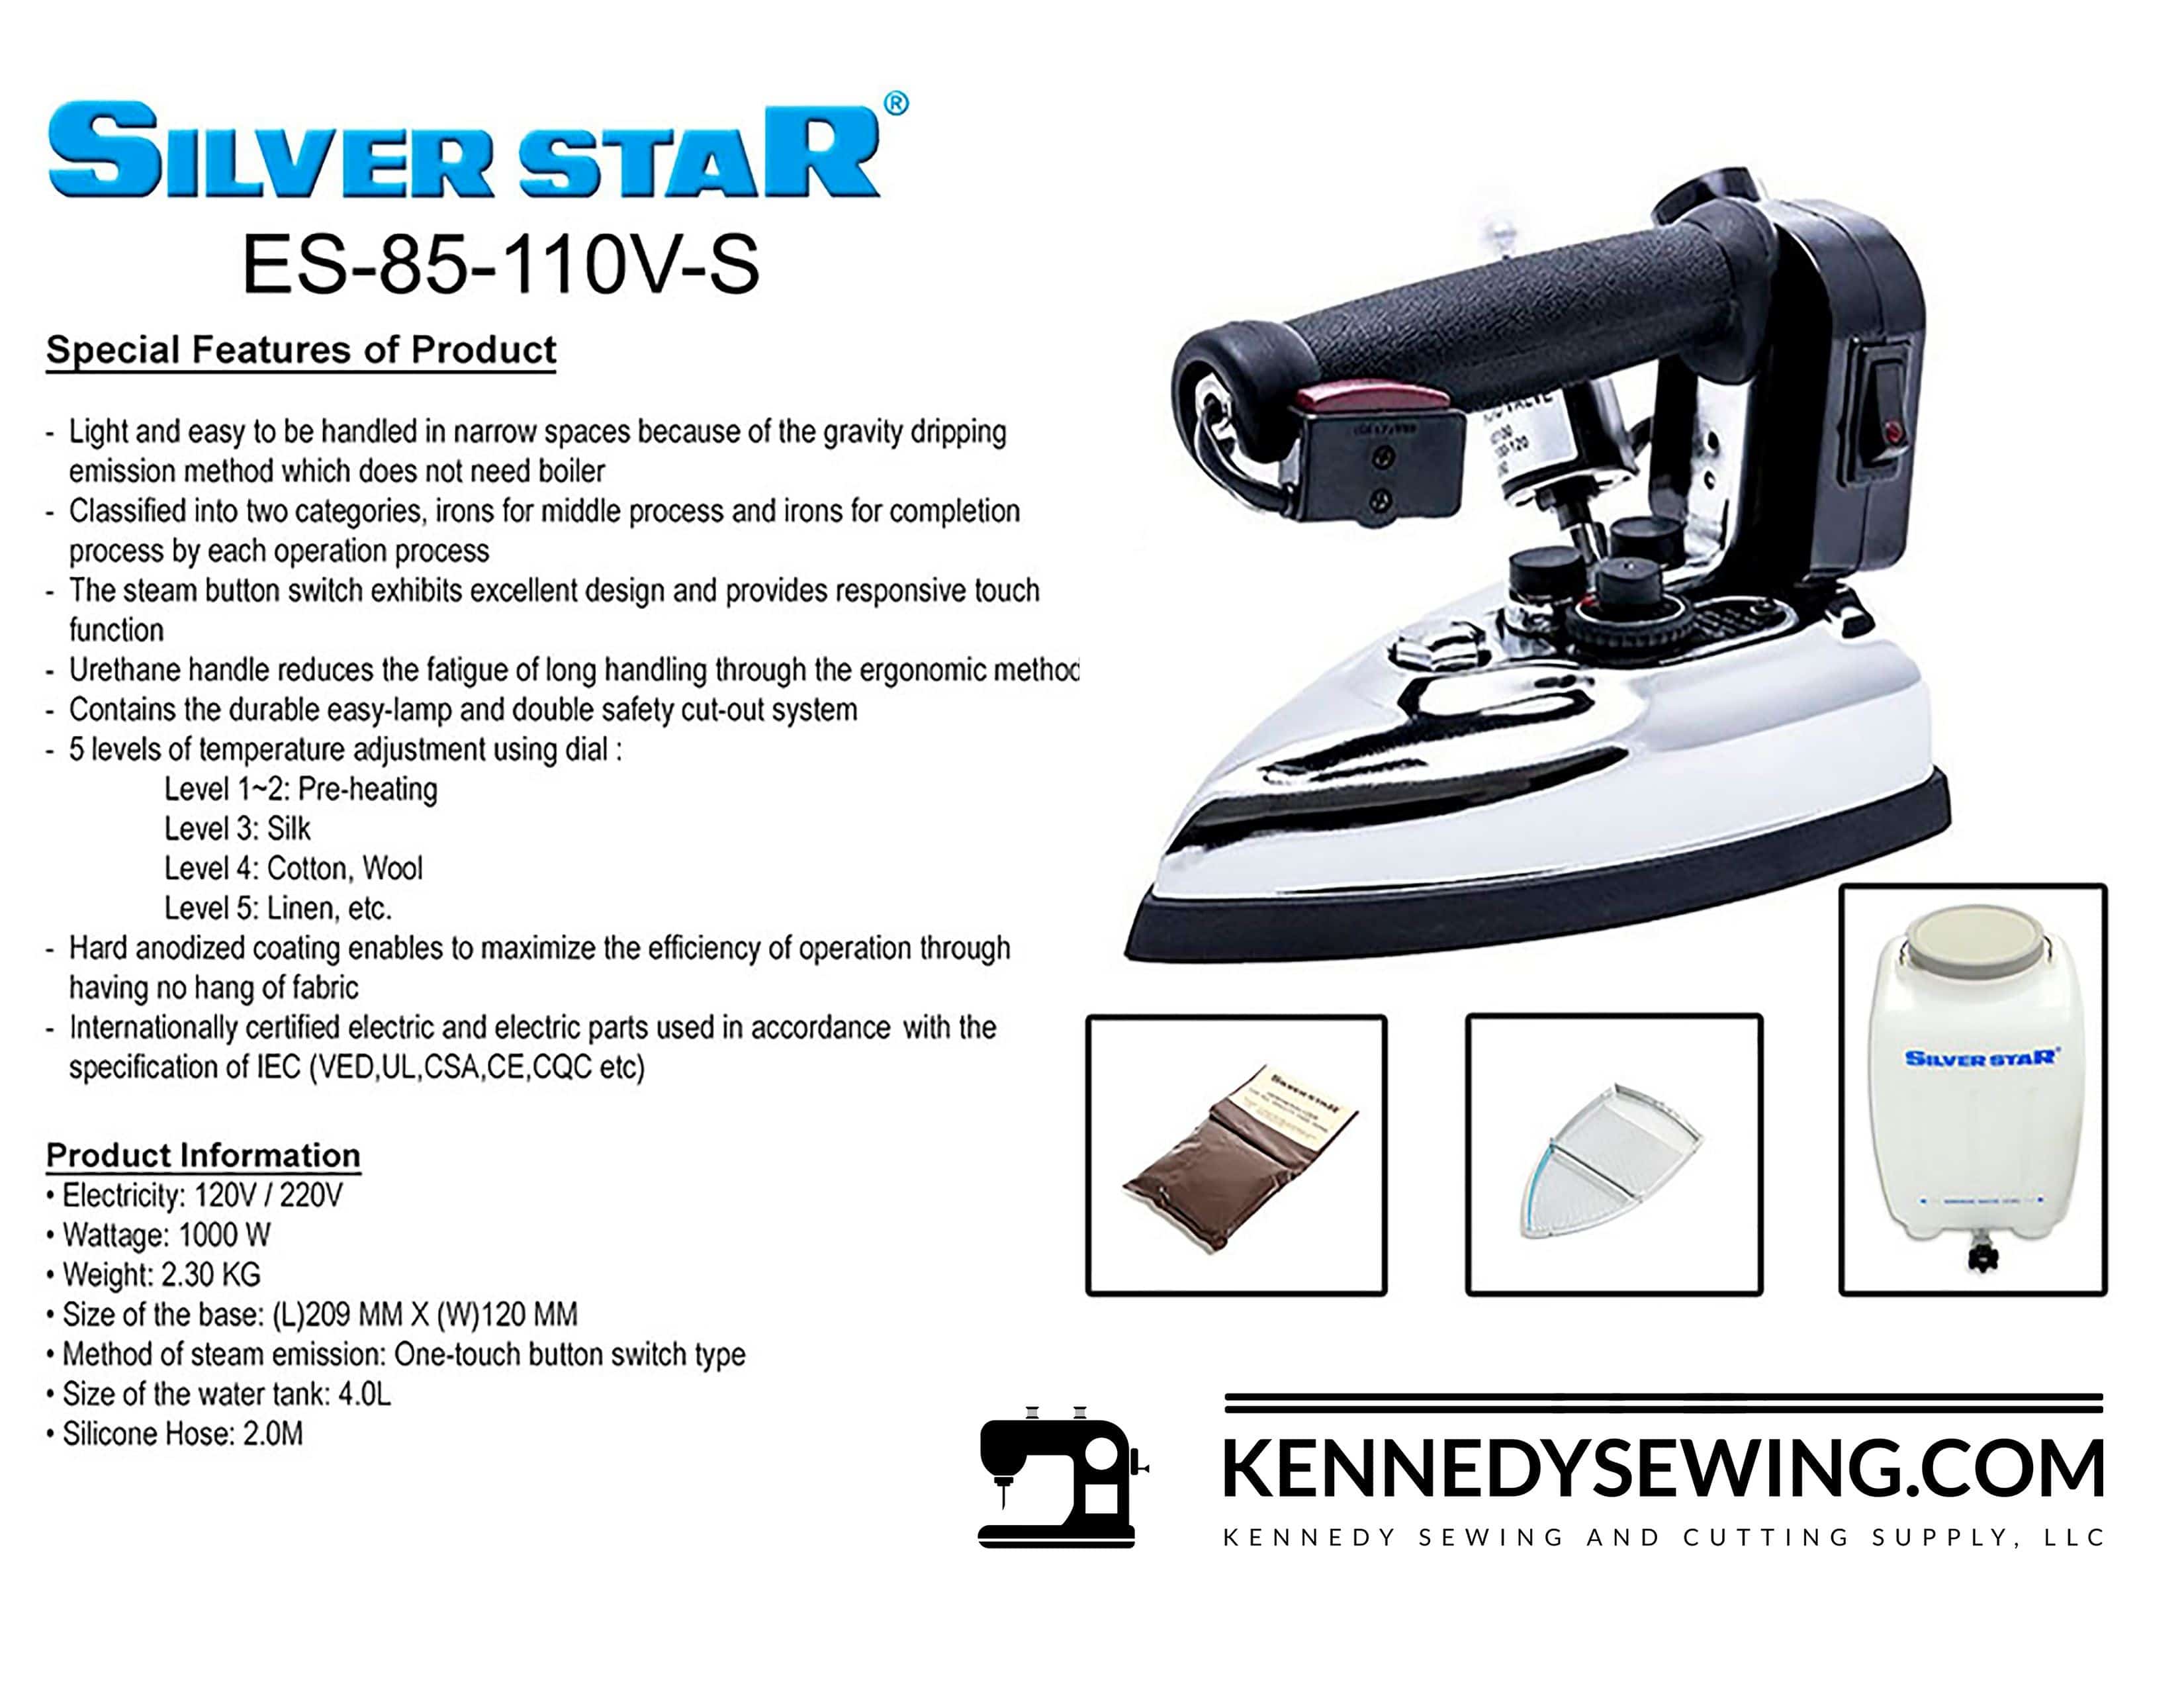 SILVER STAR 
Model: ES-85-110V-S 
IRON WITH GRAVITY DRIP
PRESSING and FINISHING EQUIPMENT
110 VOLTS